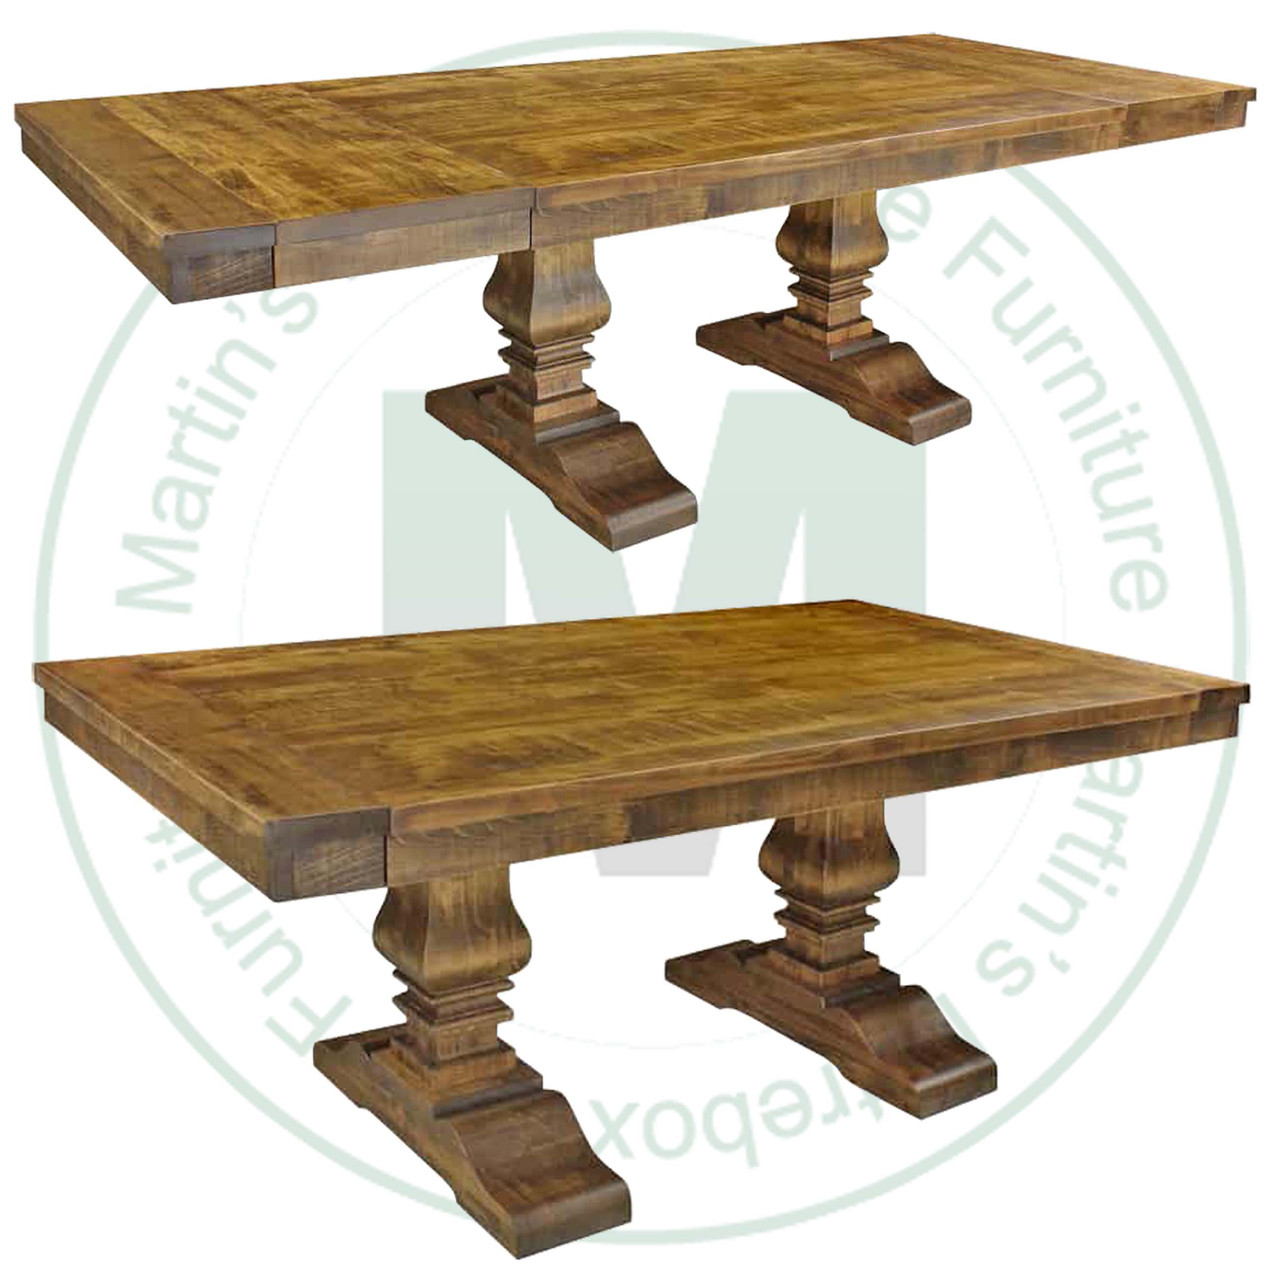 Pine Century Solid Top Double Pedestal Table 36'' Deep x 72'' Wide x 30'' High With 2 - 16'' End Leaves